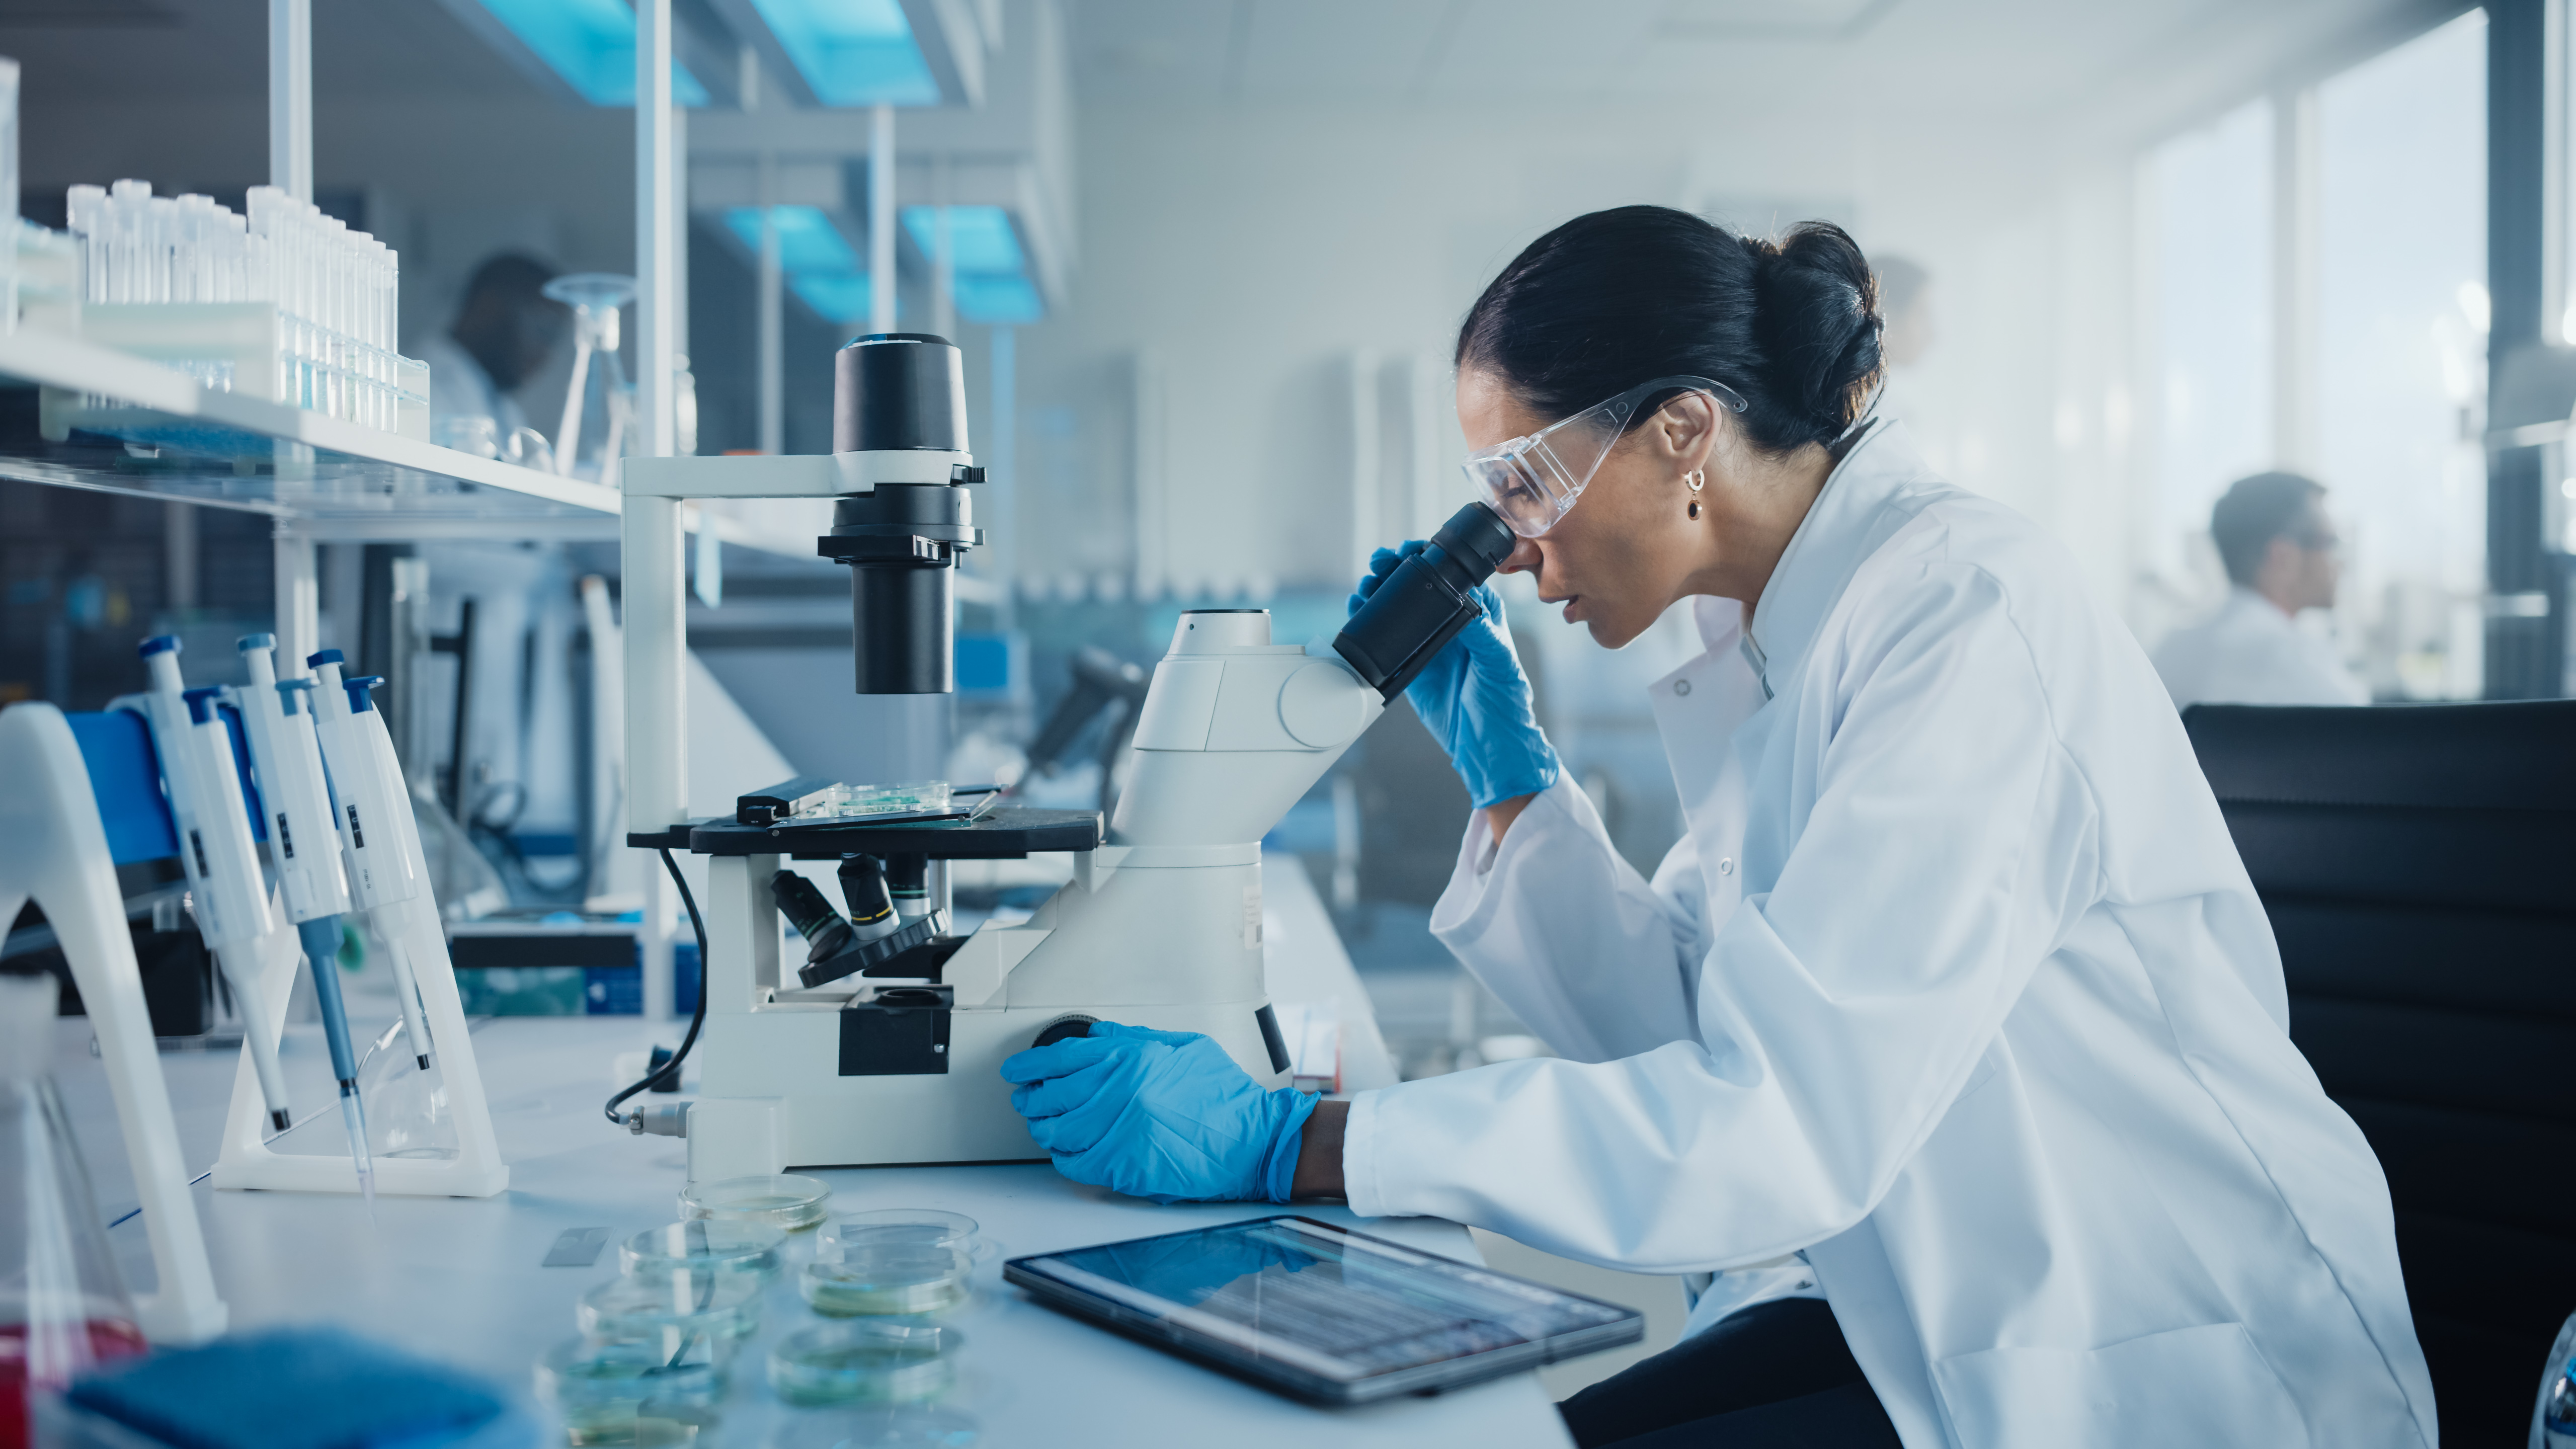 Image of a woman scientist wearing a lab coat and protective gear while looking into a microscope 